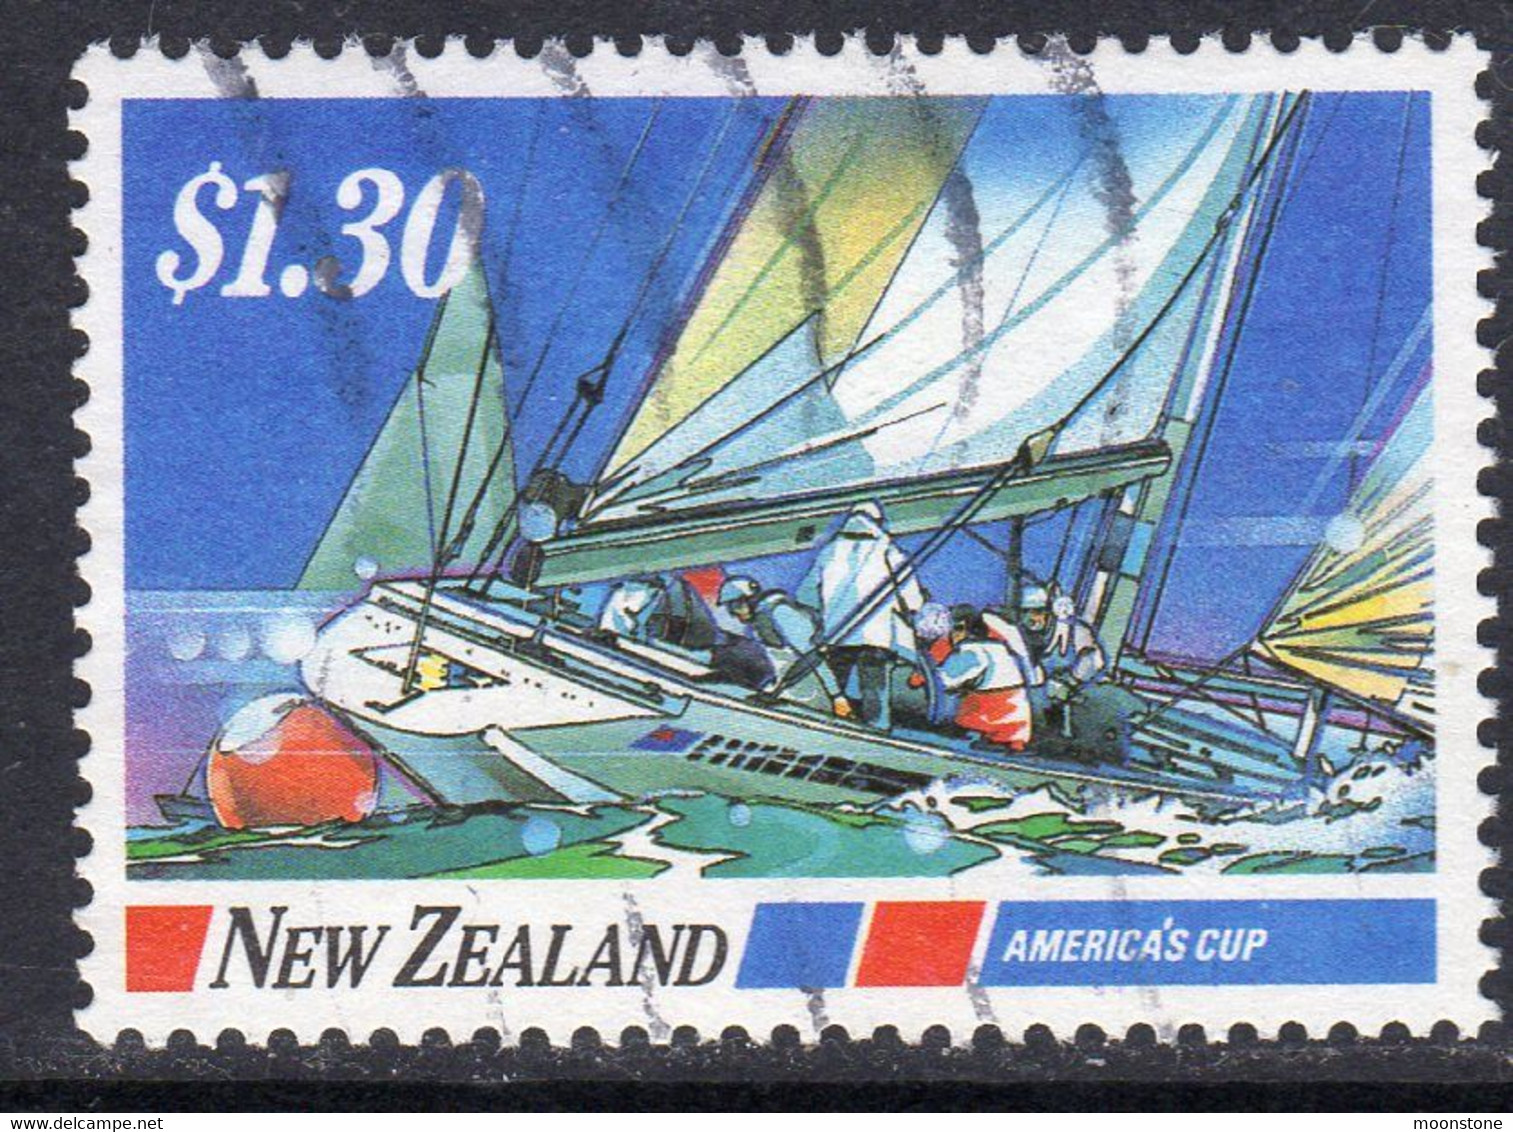 New Zealand 1987 Yachting $1.80 Value, Used, SG 1420 - Oblitérés